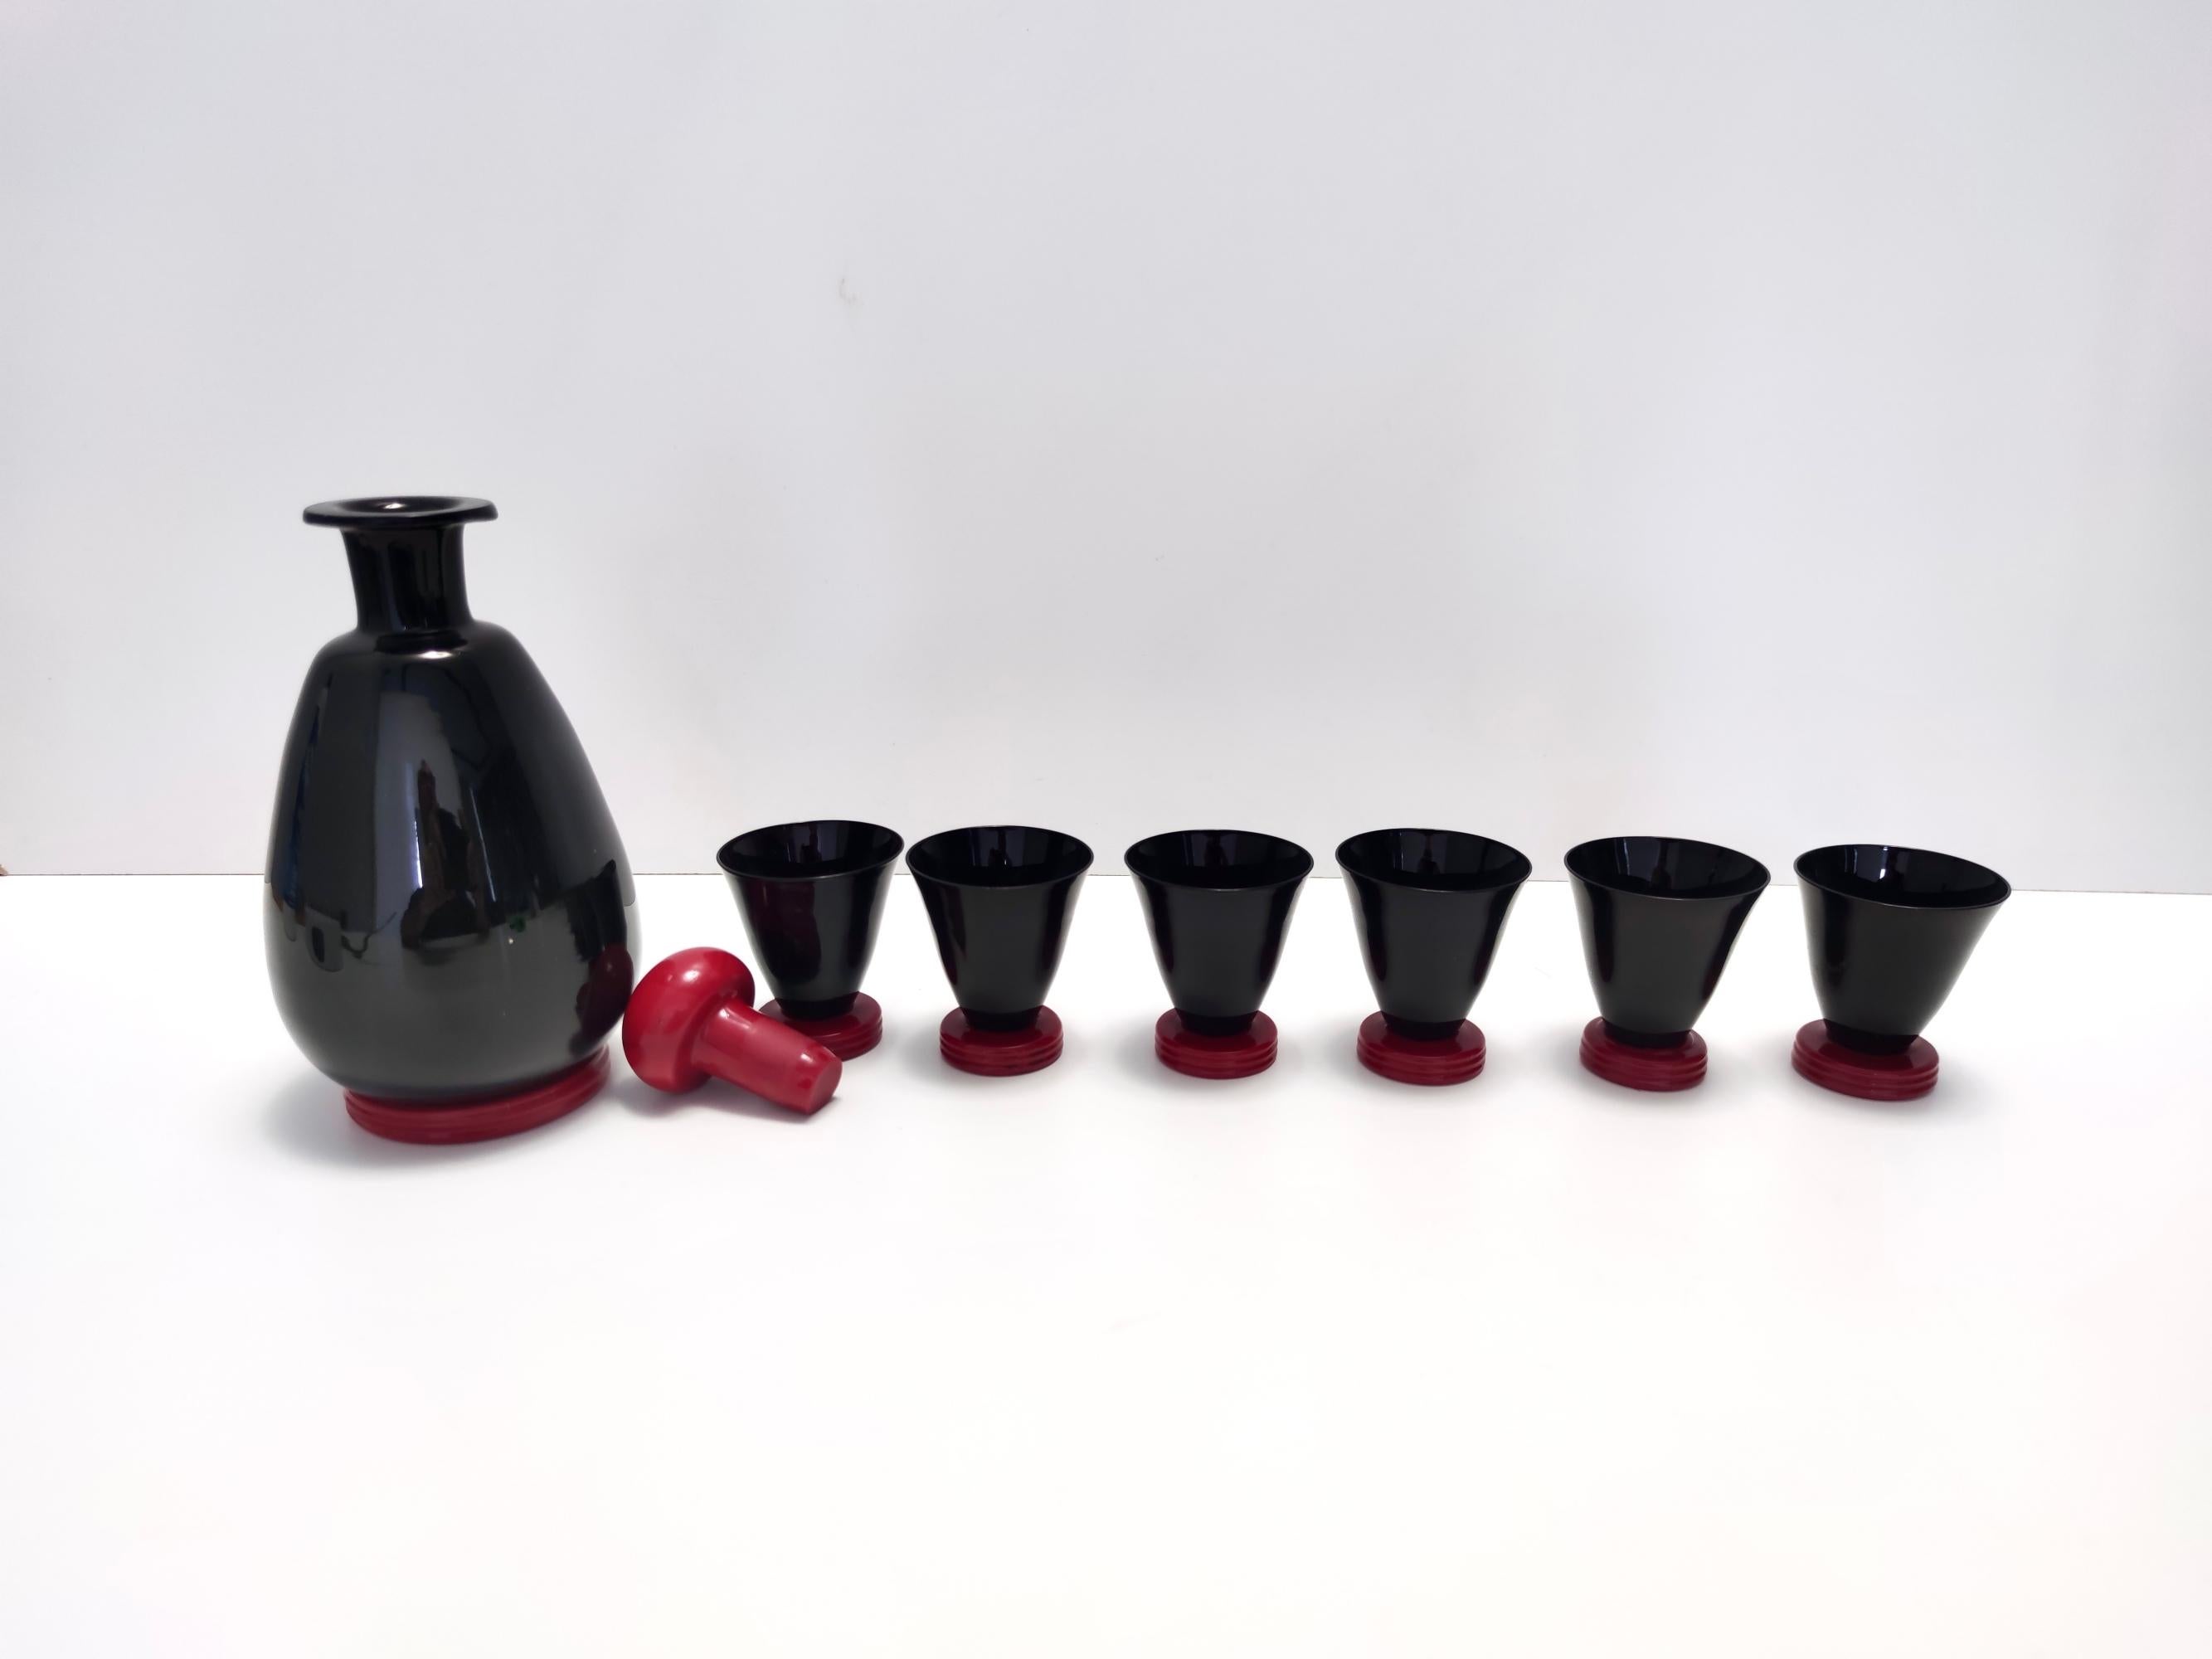 Vintage Rare Black and Red Glass Liqueur Drinking Set by Moretti & Nason, Italy In Excellent Condition For Sale In Bresso, Lombardy